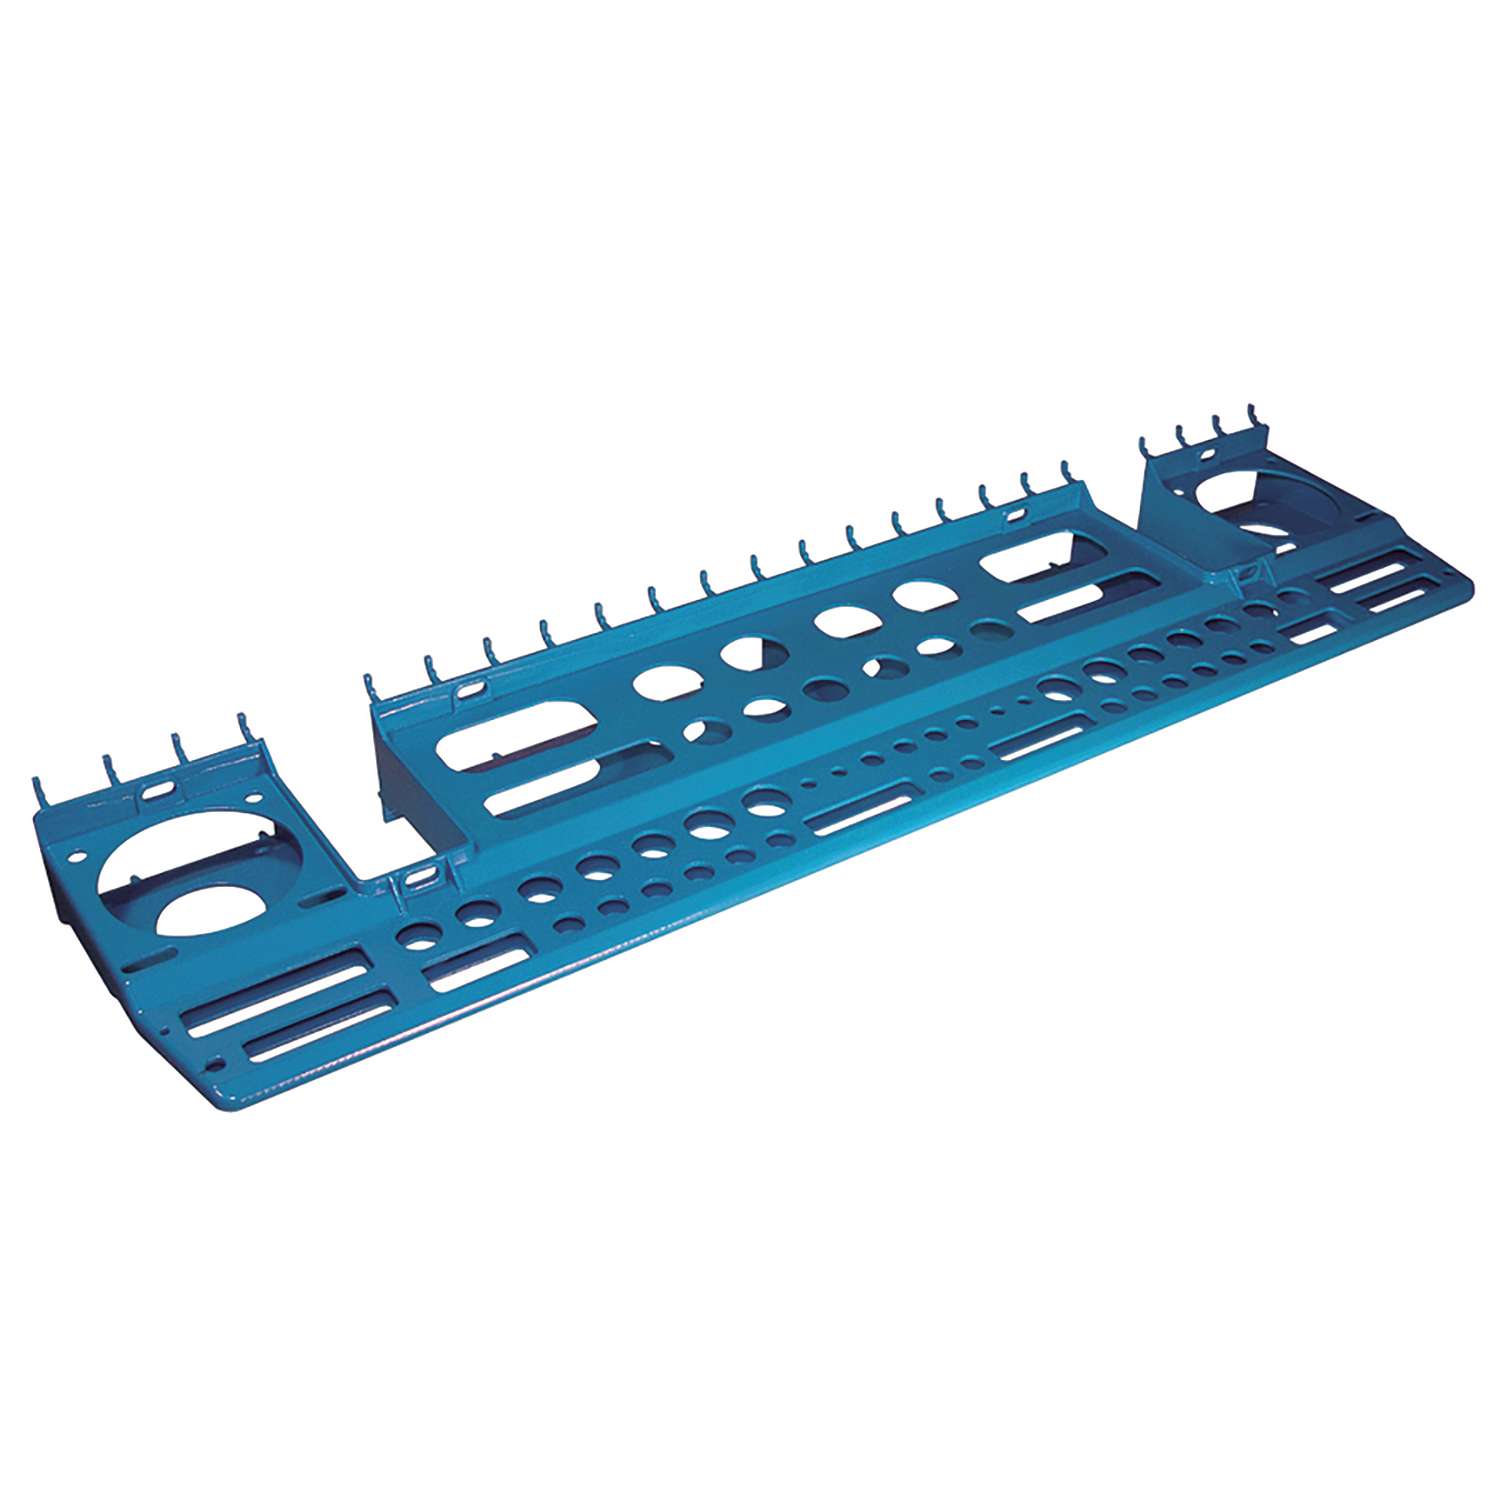 Crawford Blue Plastic 6 in. 3 in 1 Tool Holder 1 pk Ace